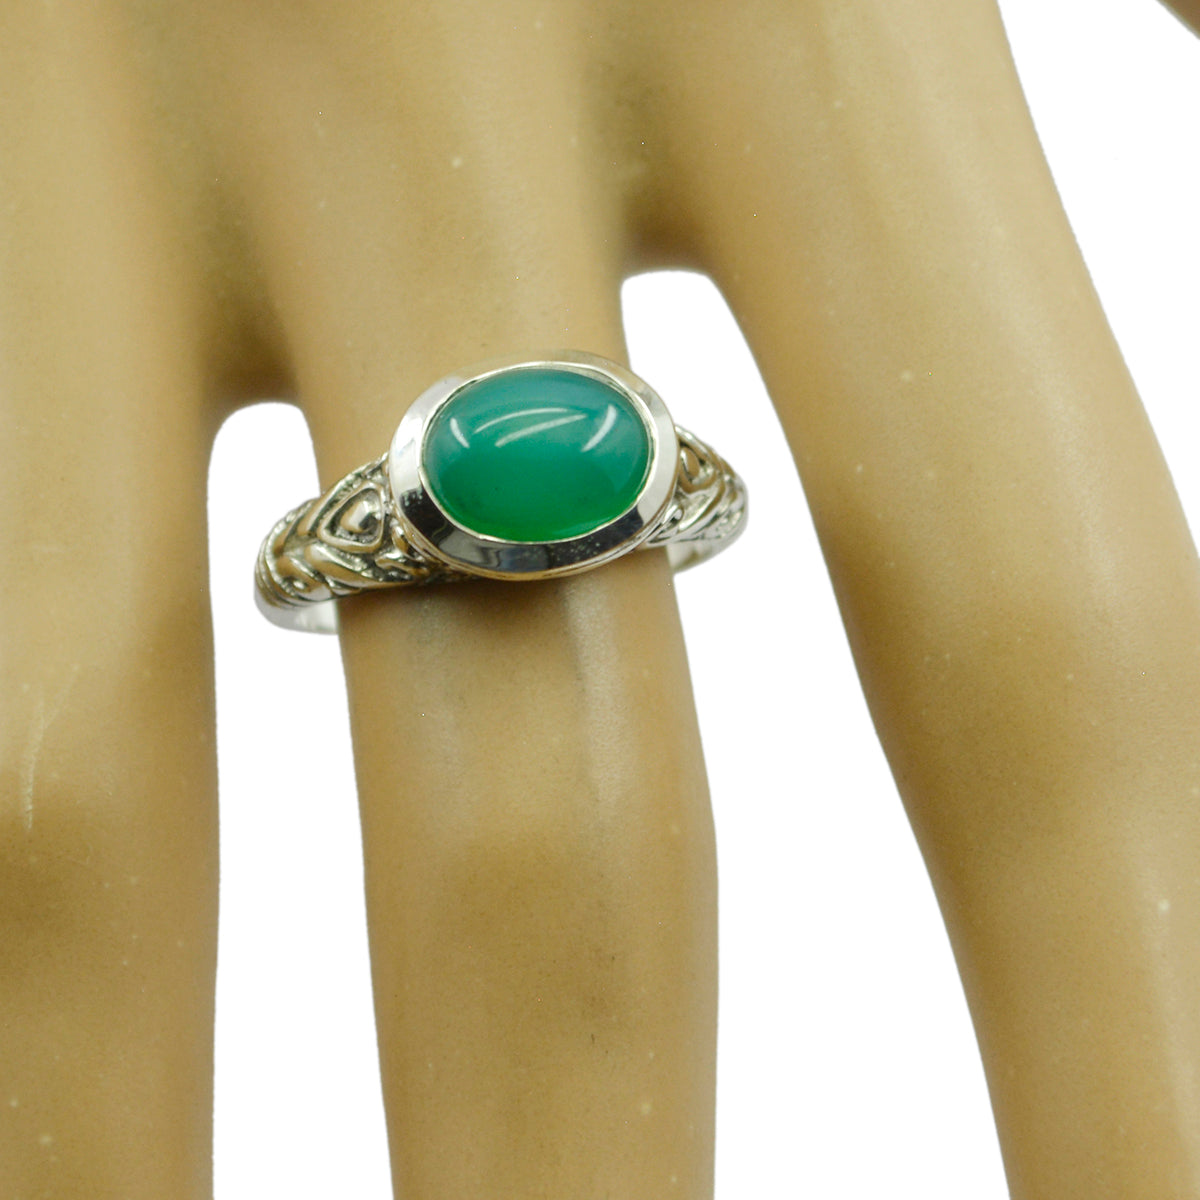 Nice Gem Green Onyx 925 Sterling Silver Ring Jewelry Box For Girlfriend